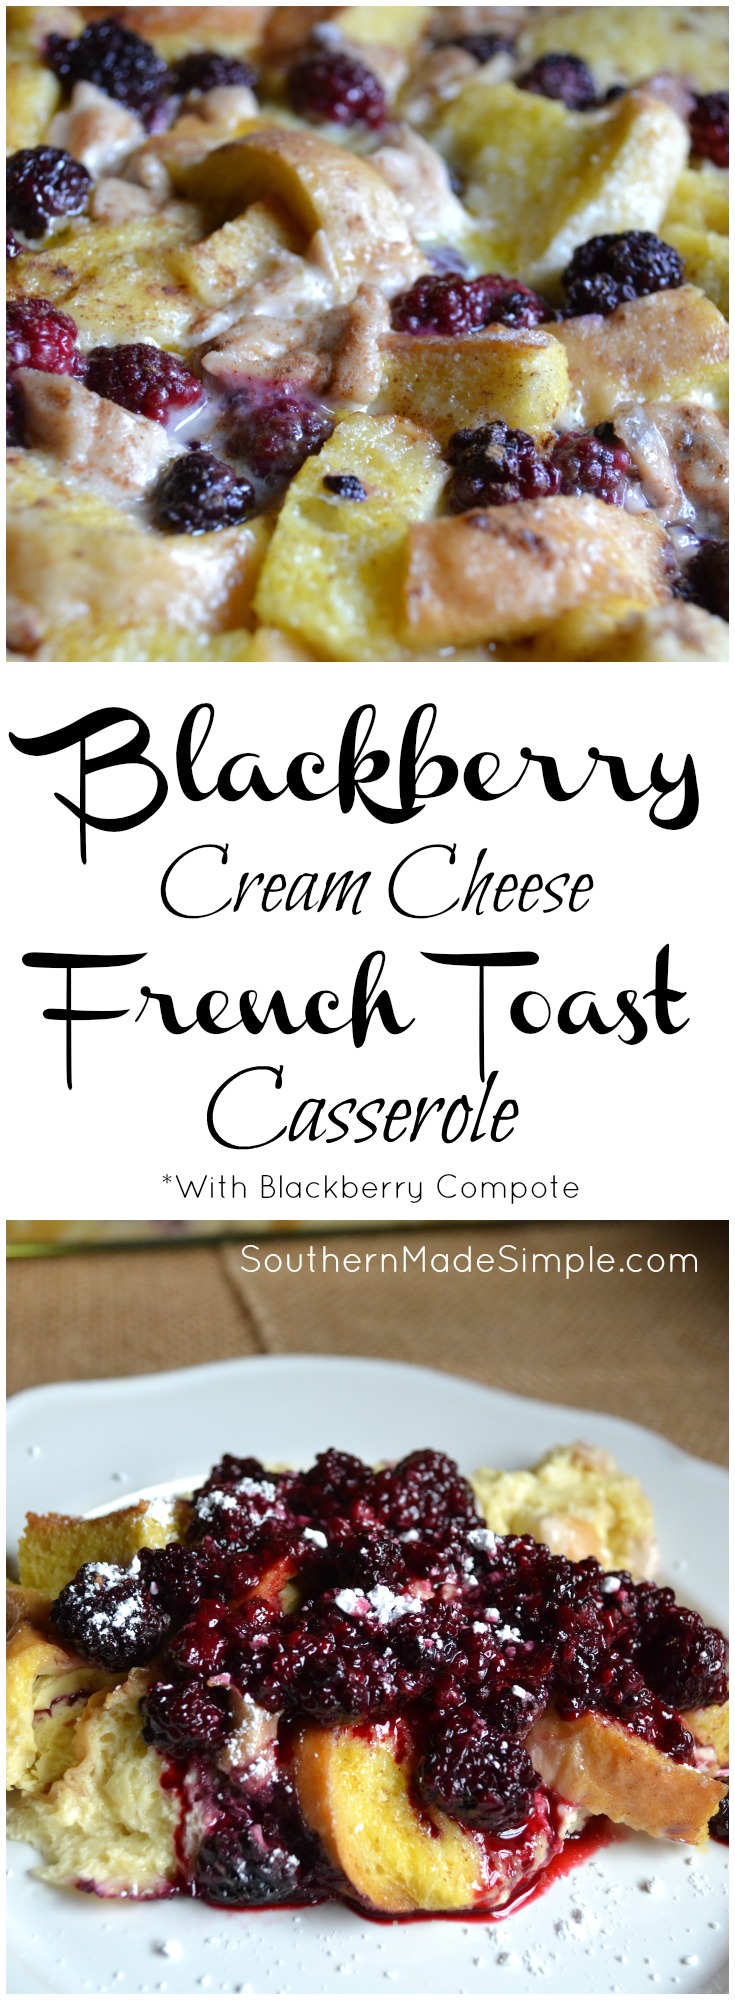 Blackberry Cream Cheese French Toast Casserole with Blackberry Compote - So delicious and easy to prepare! 